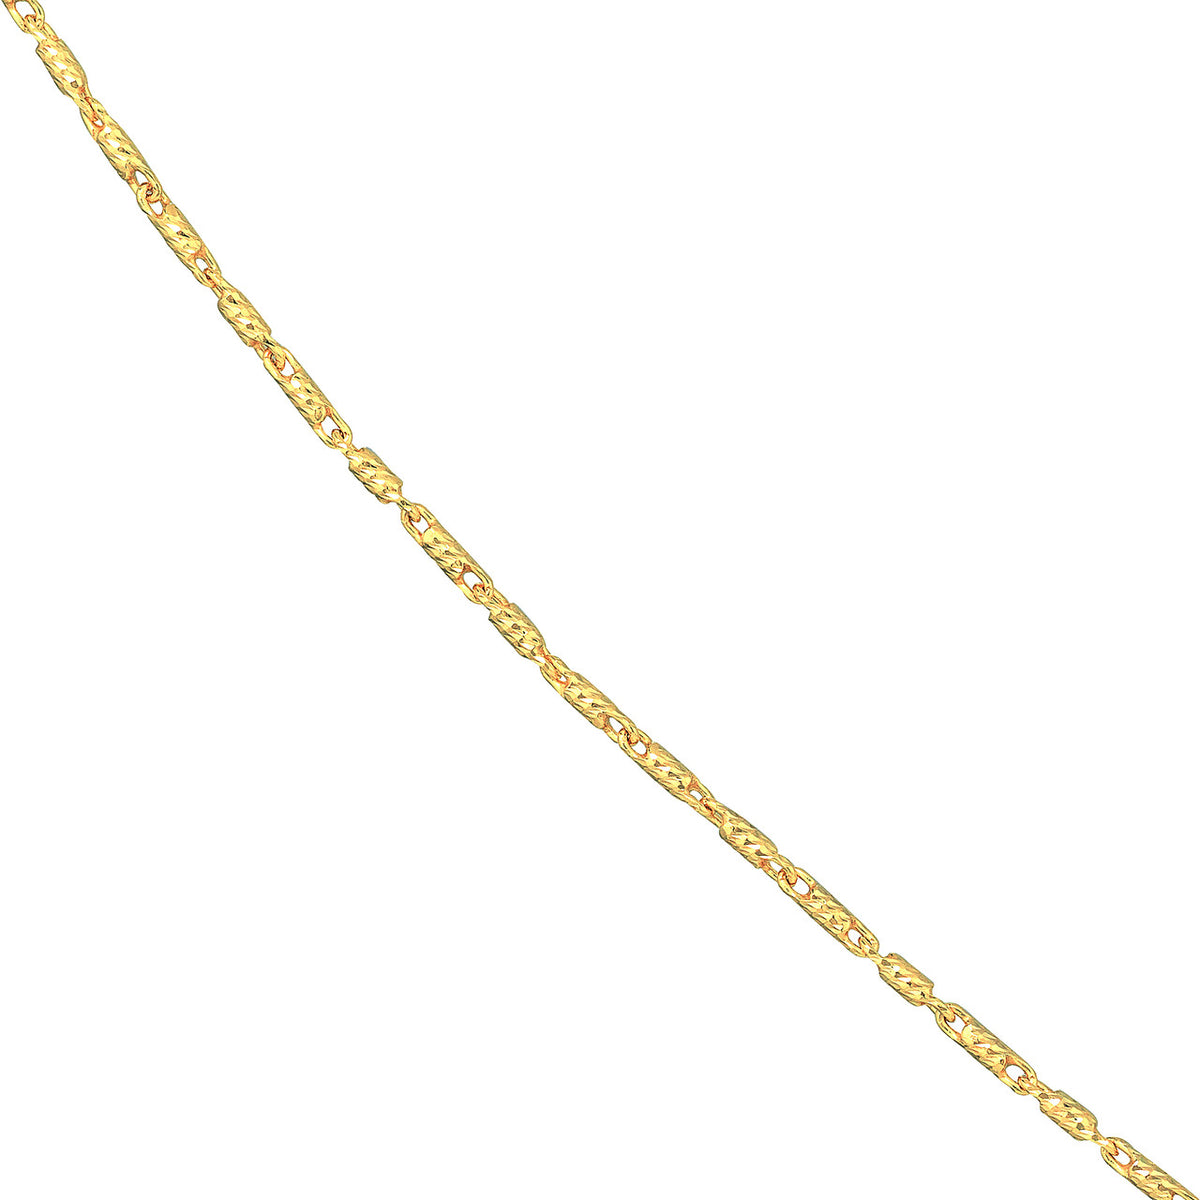 14K Yellow Gold and White Gold 0.95mm D/C Tube Bead Chain Necklace with Lobster Lock